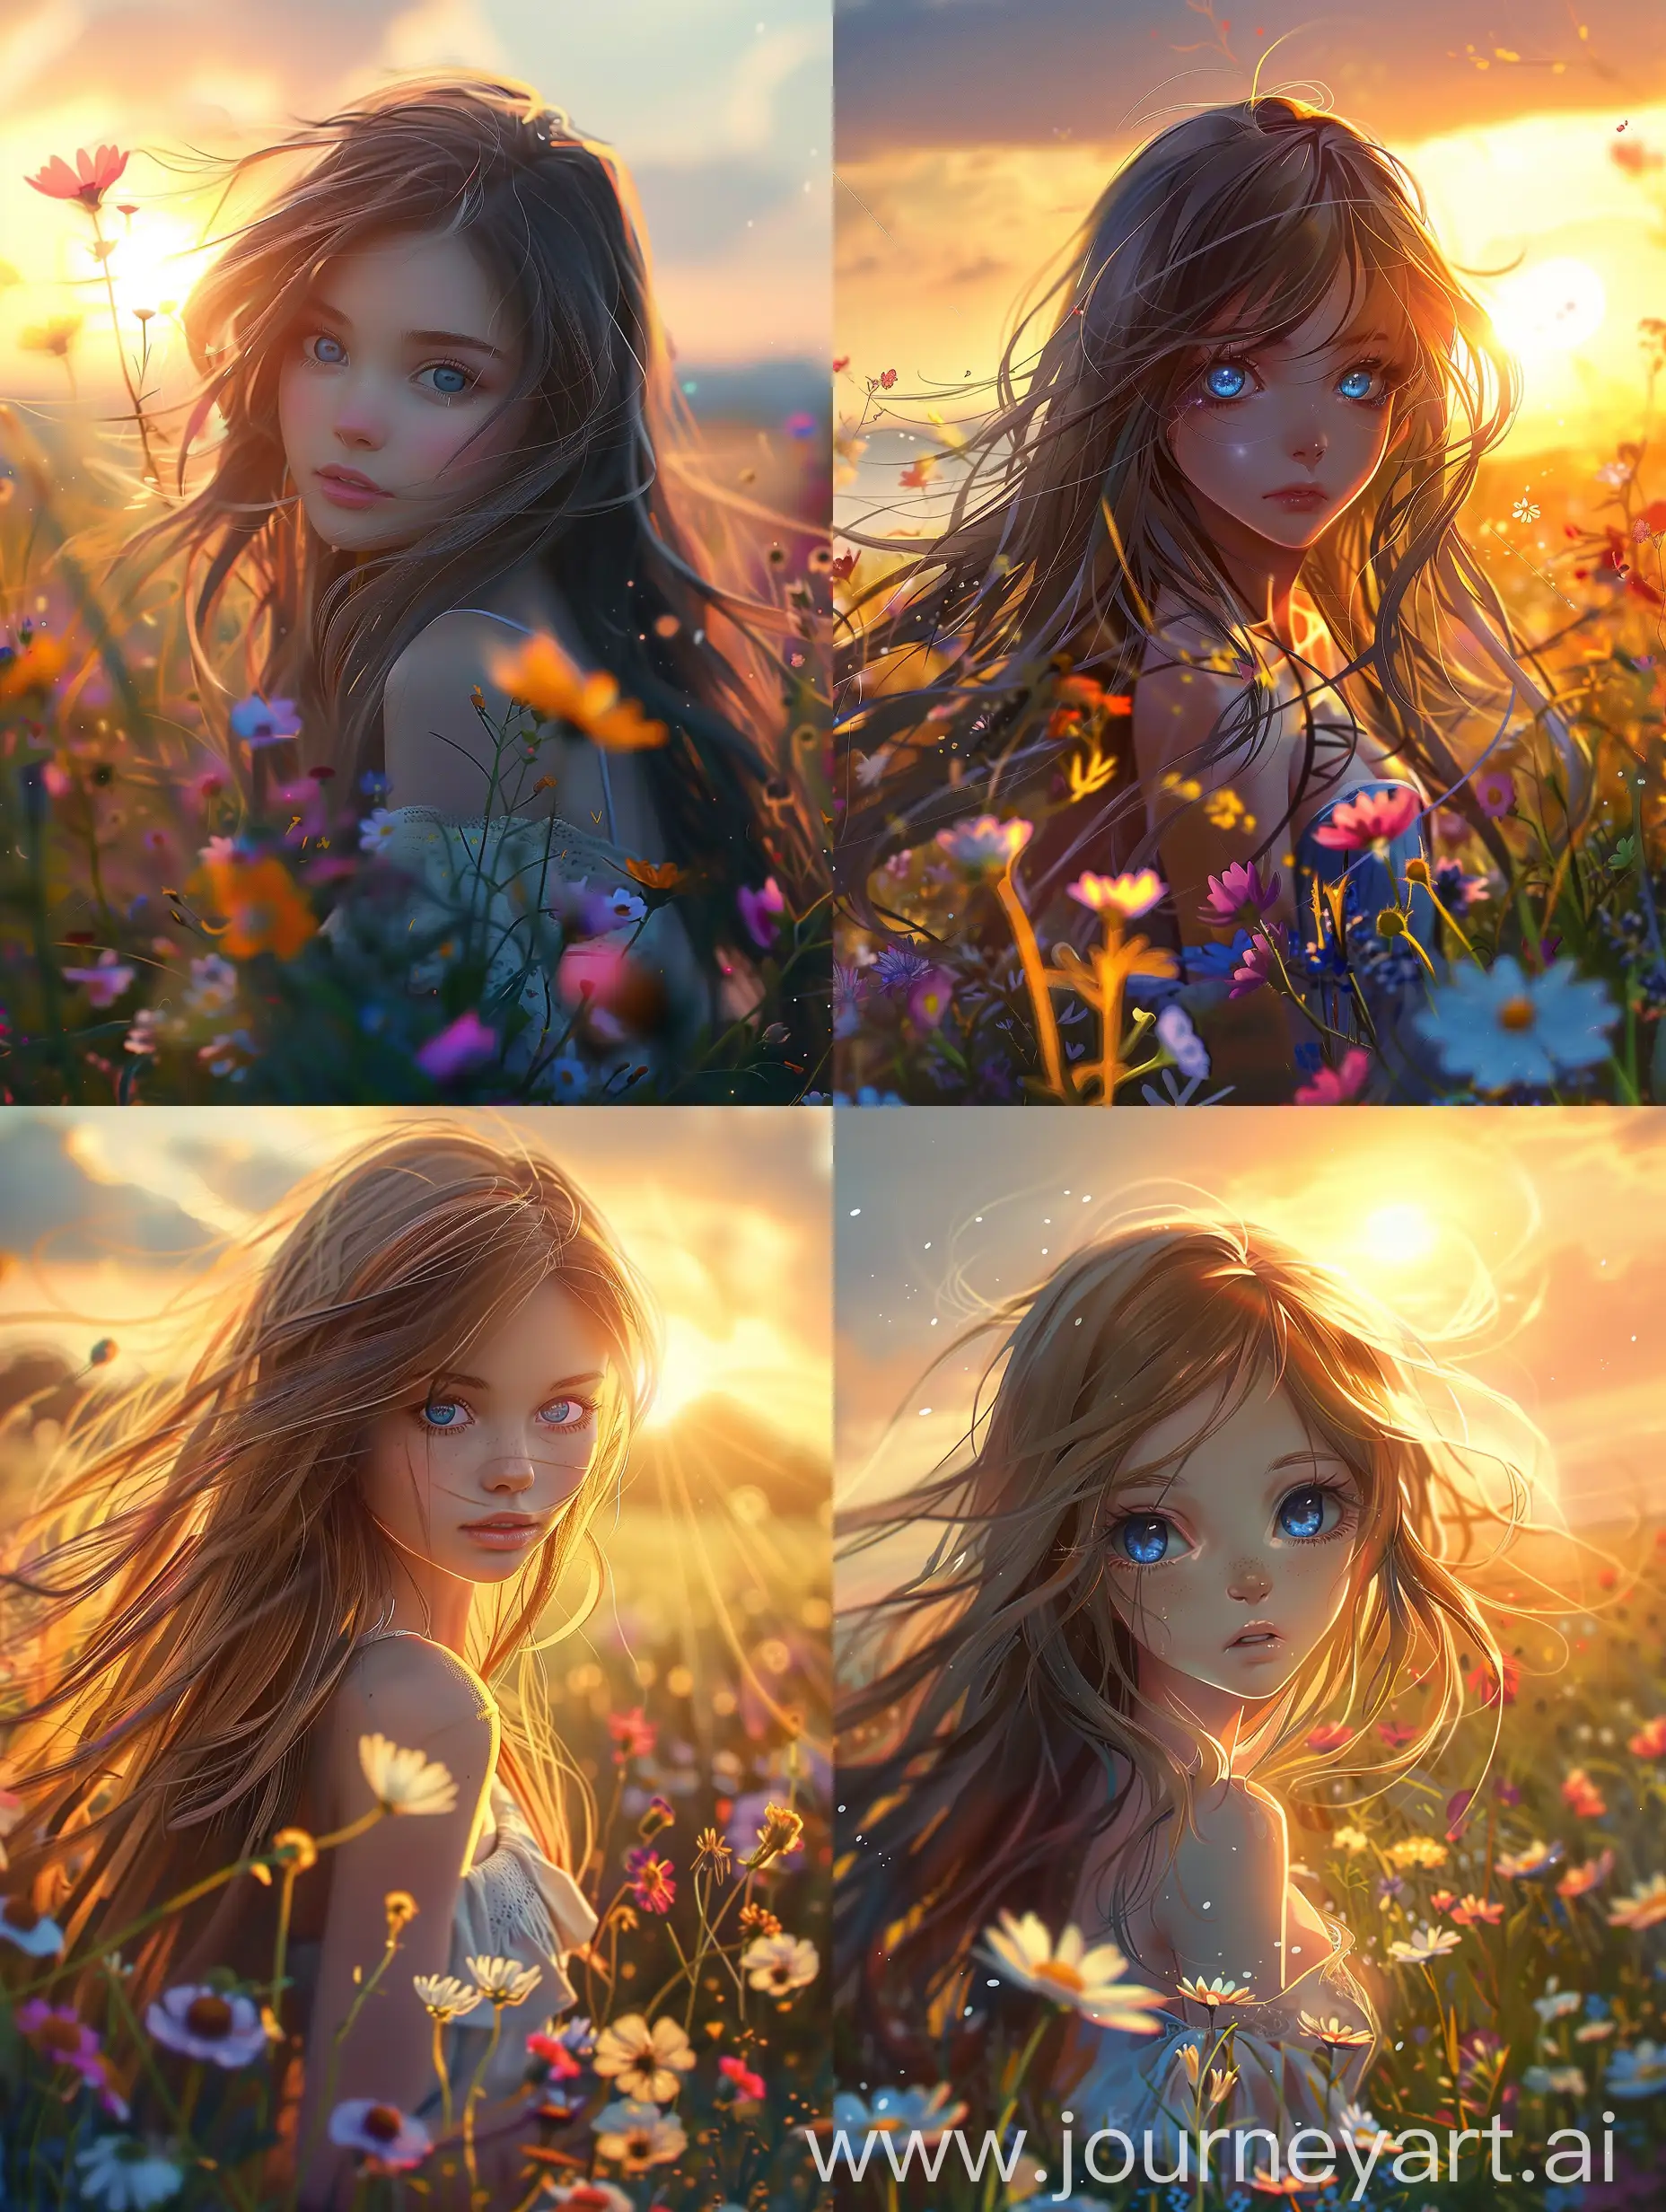 Enchanting-Girl-in-Wildflower-Field-at-Sunset